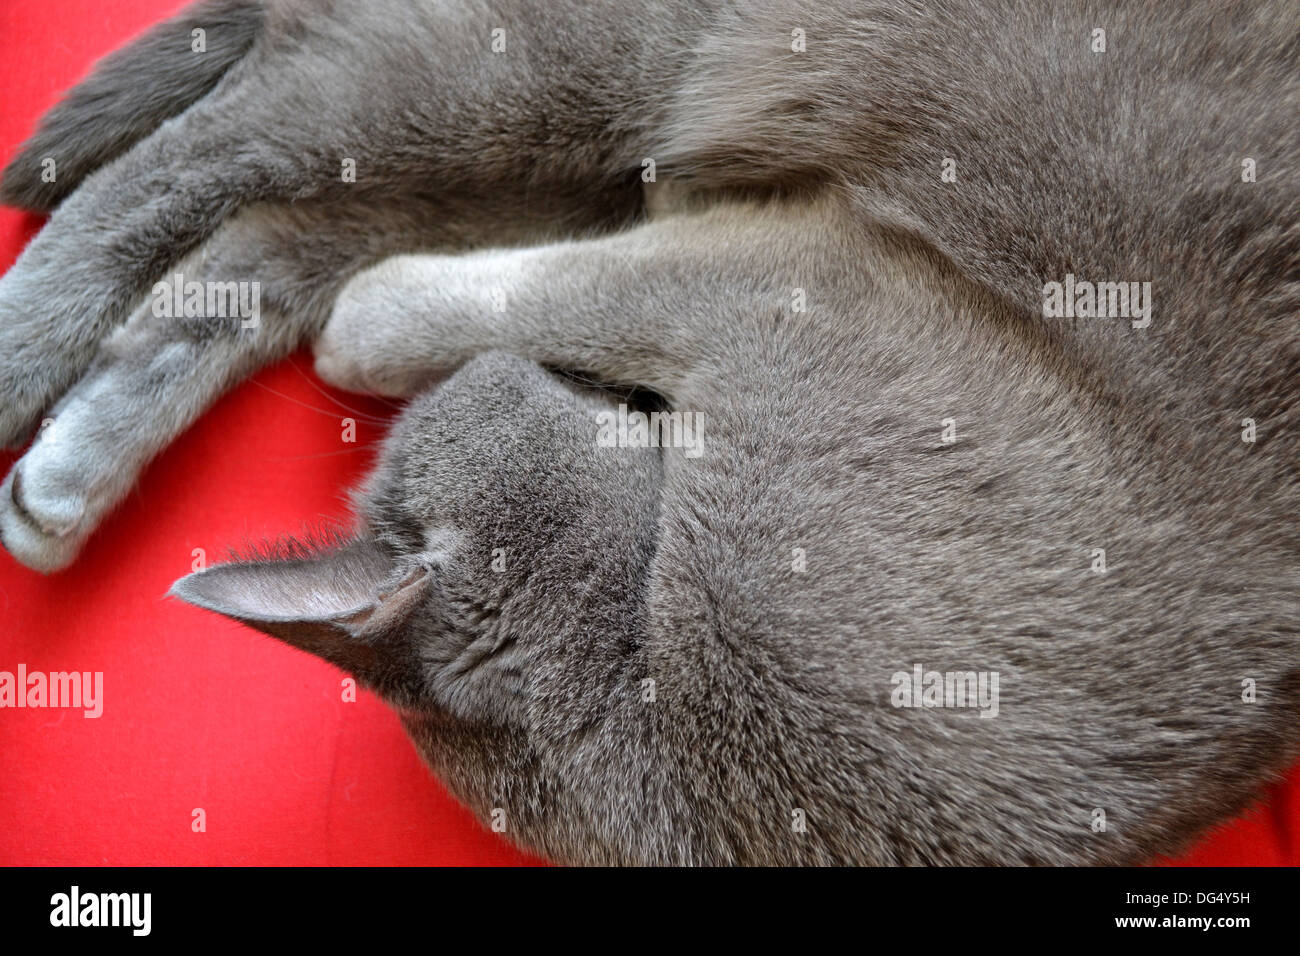 Russian Blue cat, curled up sleeping Stock Photo